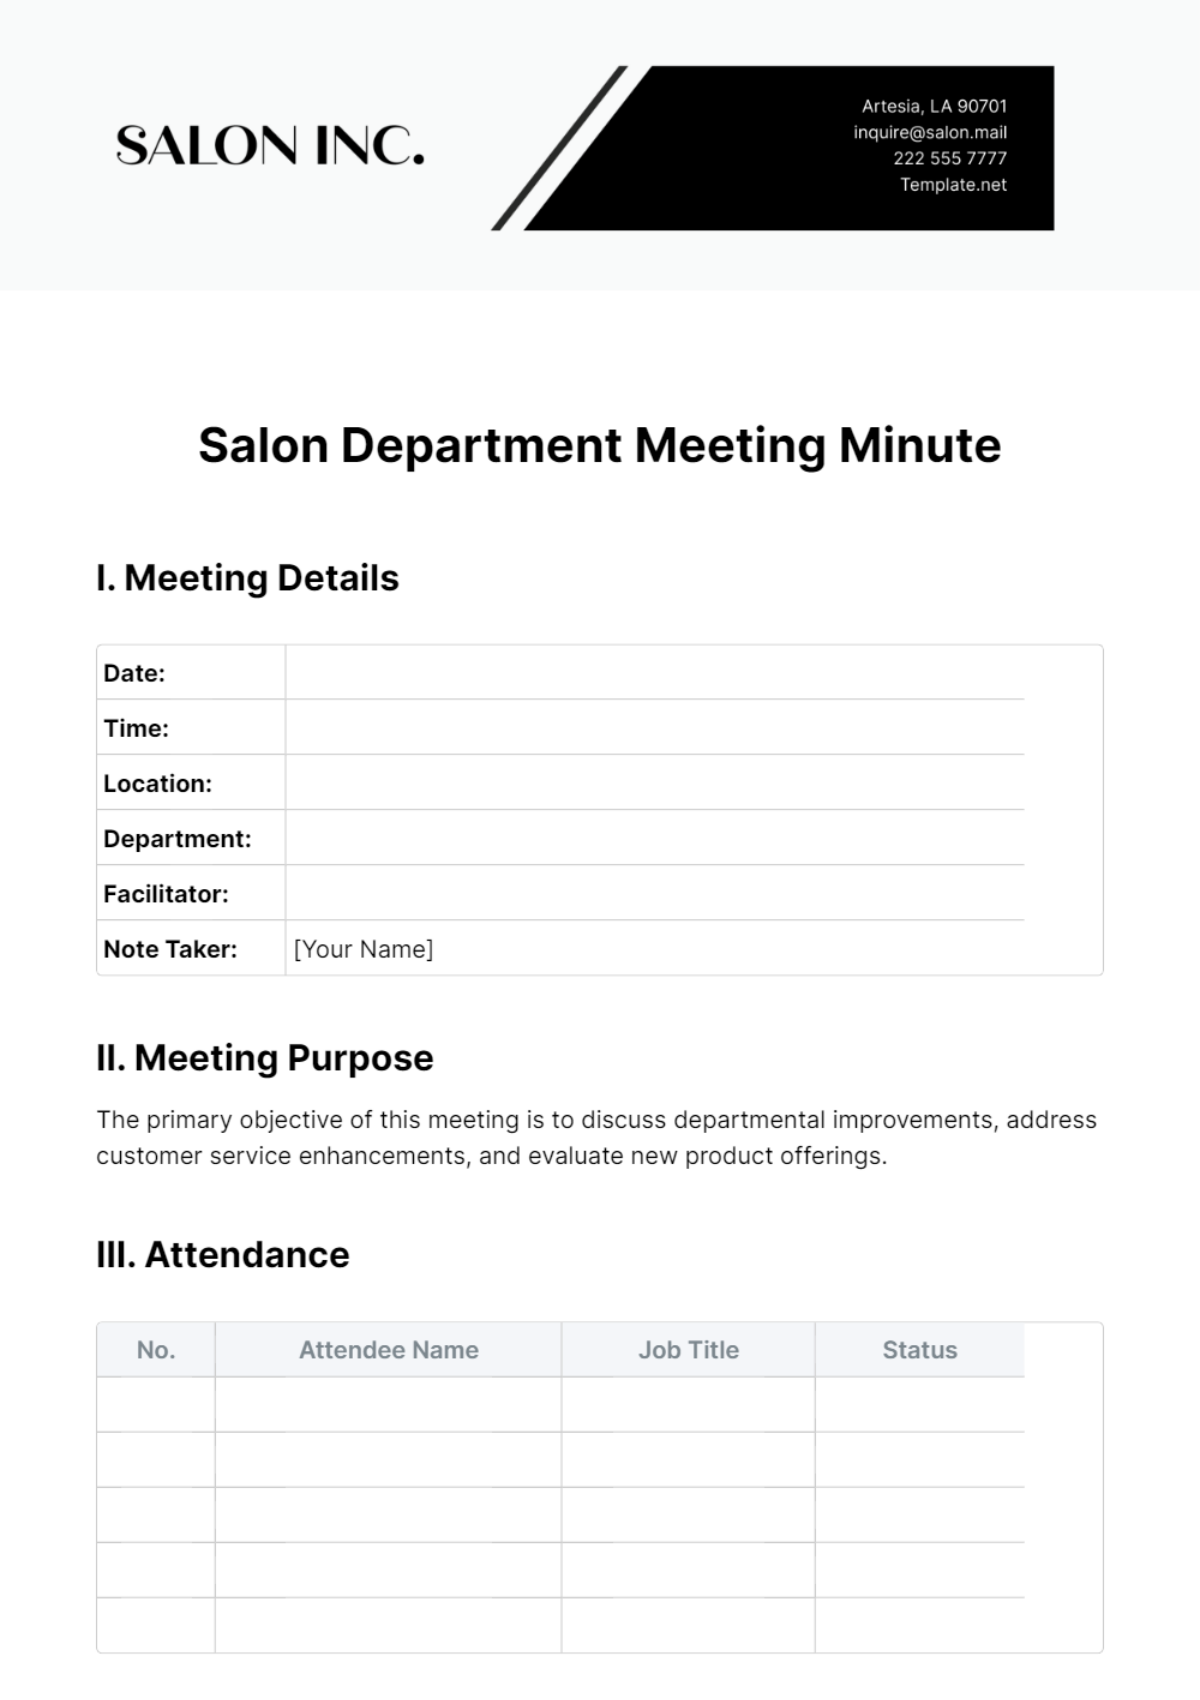 Free Salon Department Meeting Minute Template